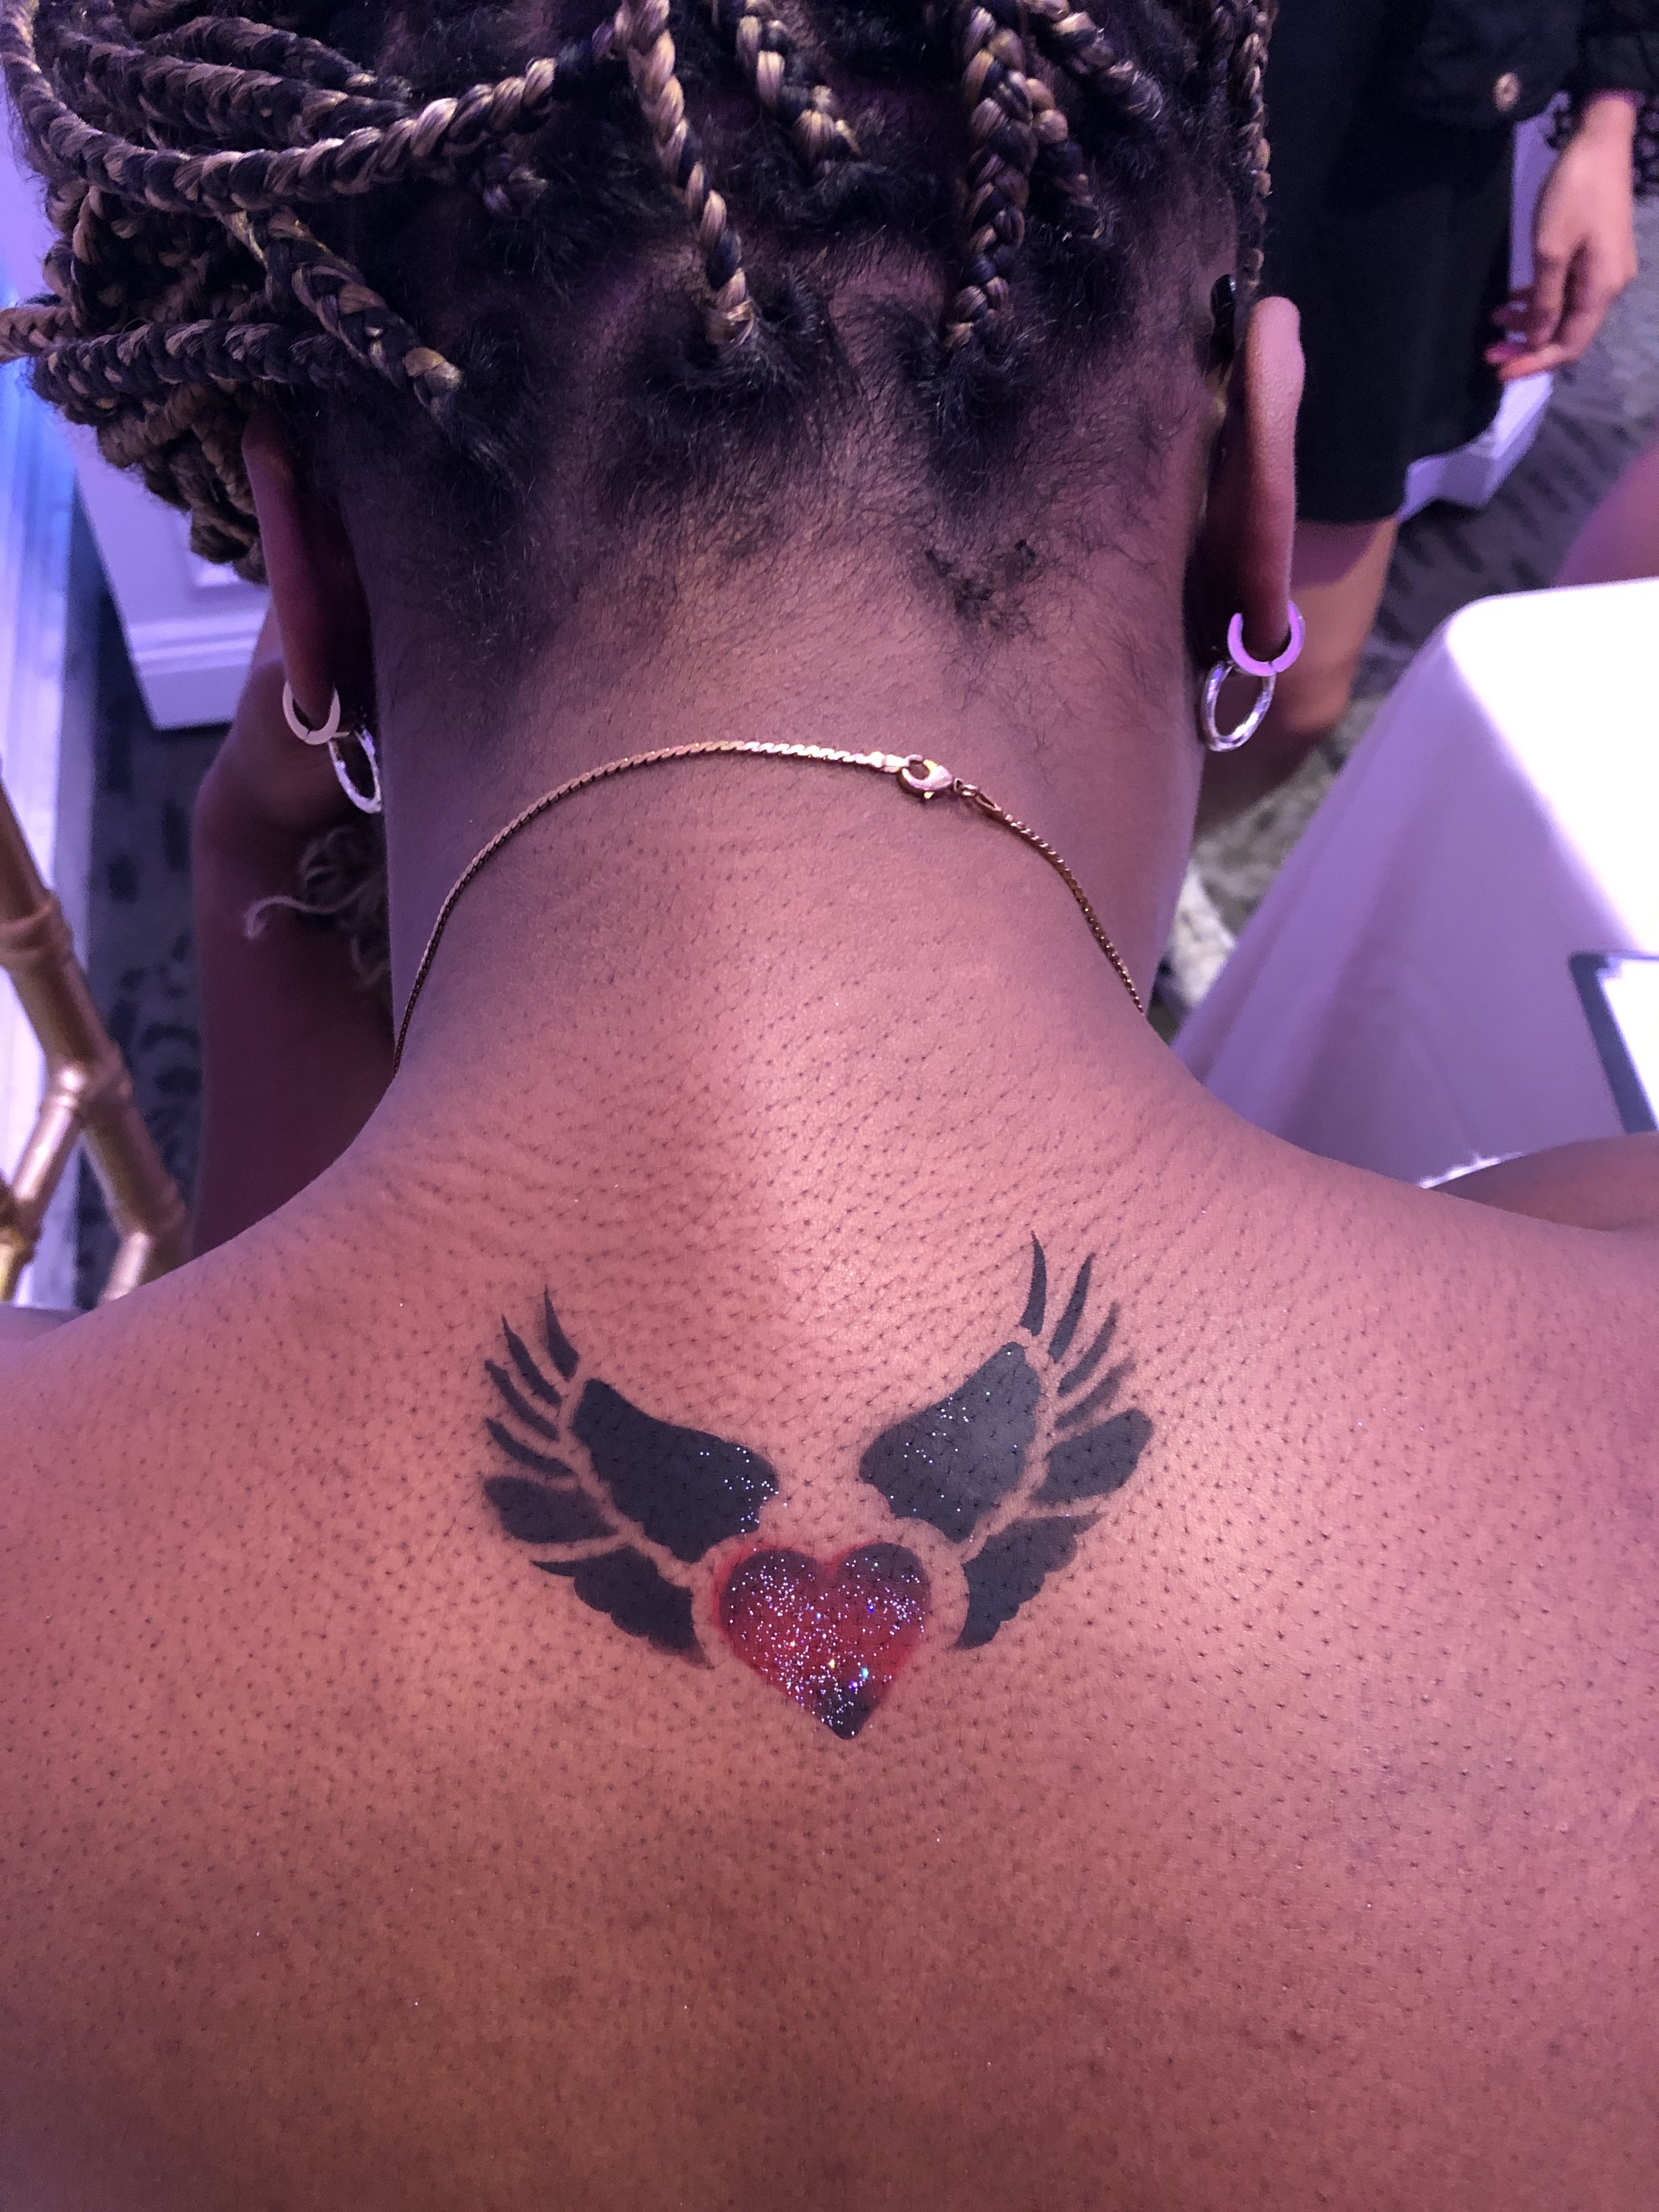 Airbrush Tattoos NYC and Westchester.JPG